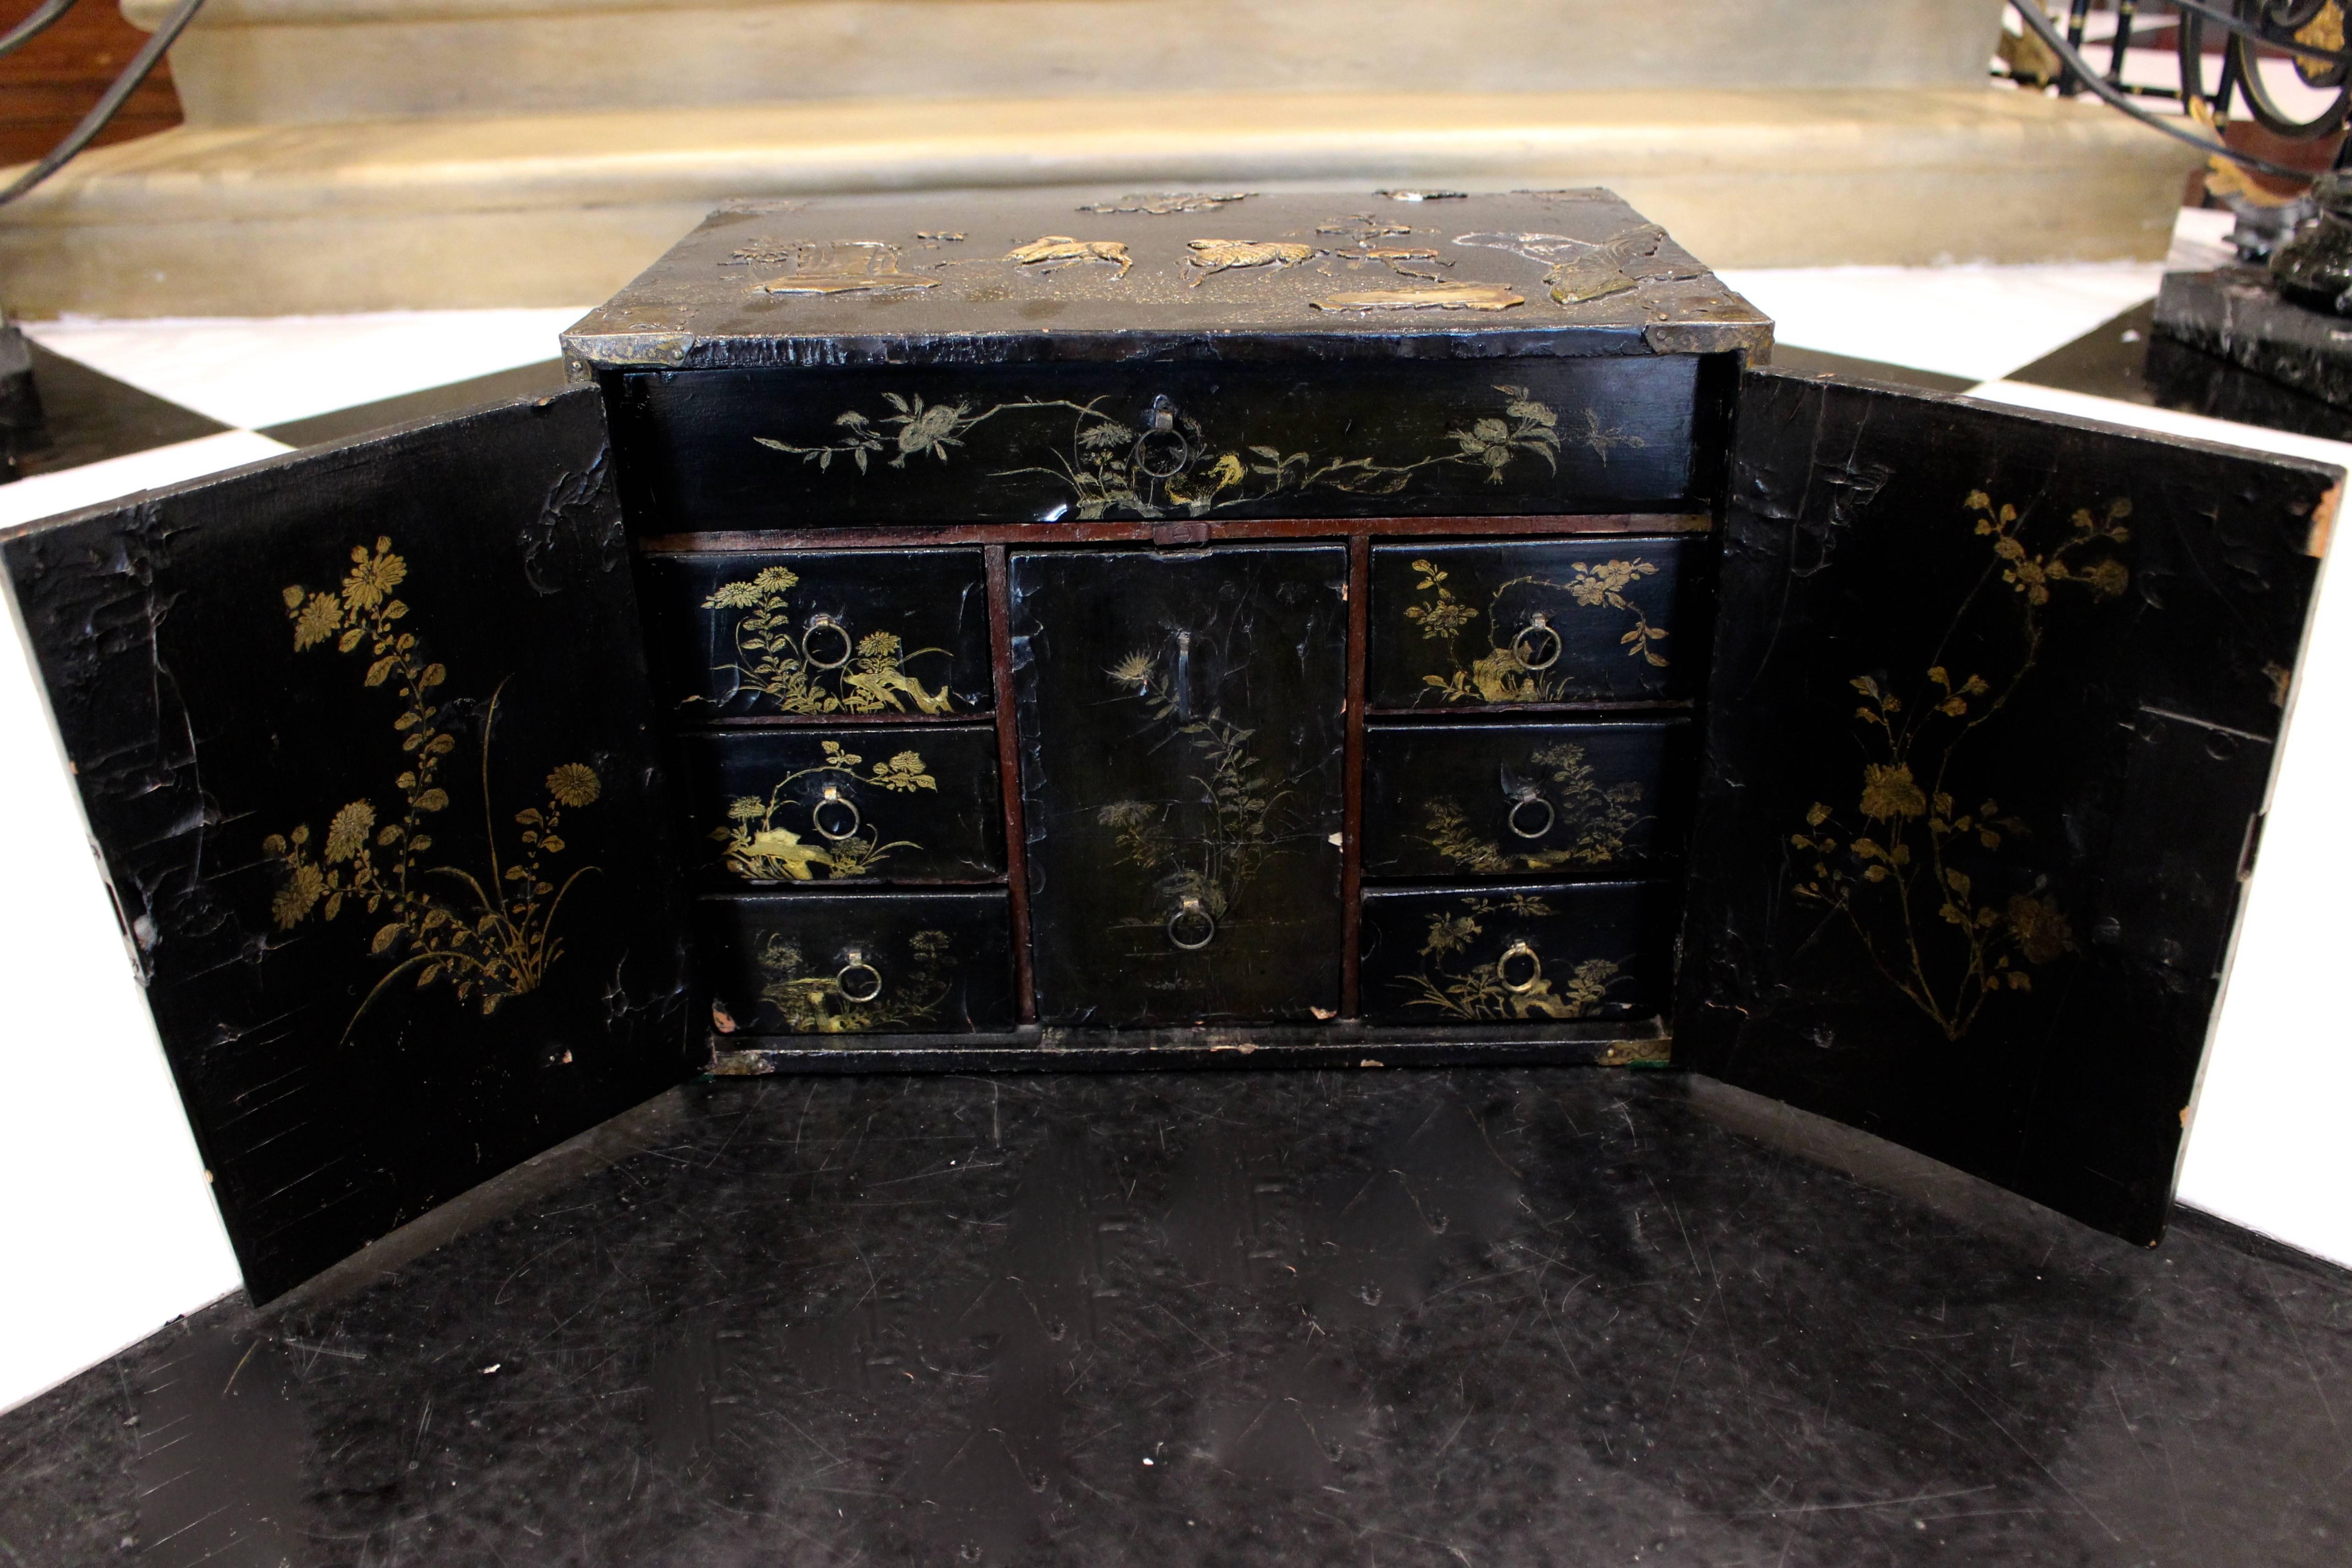 A late 18th century small Chinese black lacquered wood cabinet decorated with a raised animal scenery in a traditional landscape design. This cabinet of rectangular shape is elaborately inlaid with an array of colored stones in raised designs of